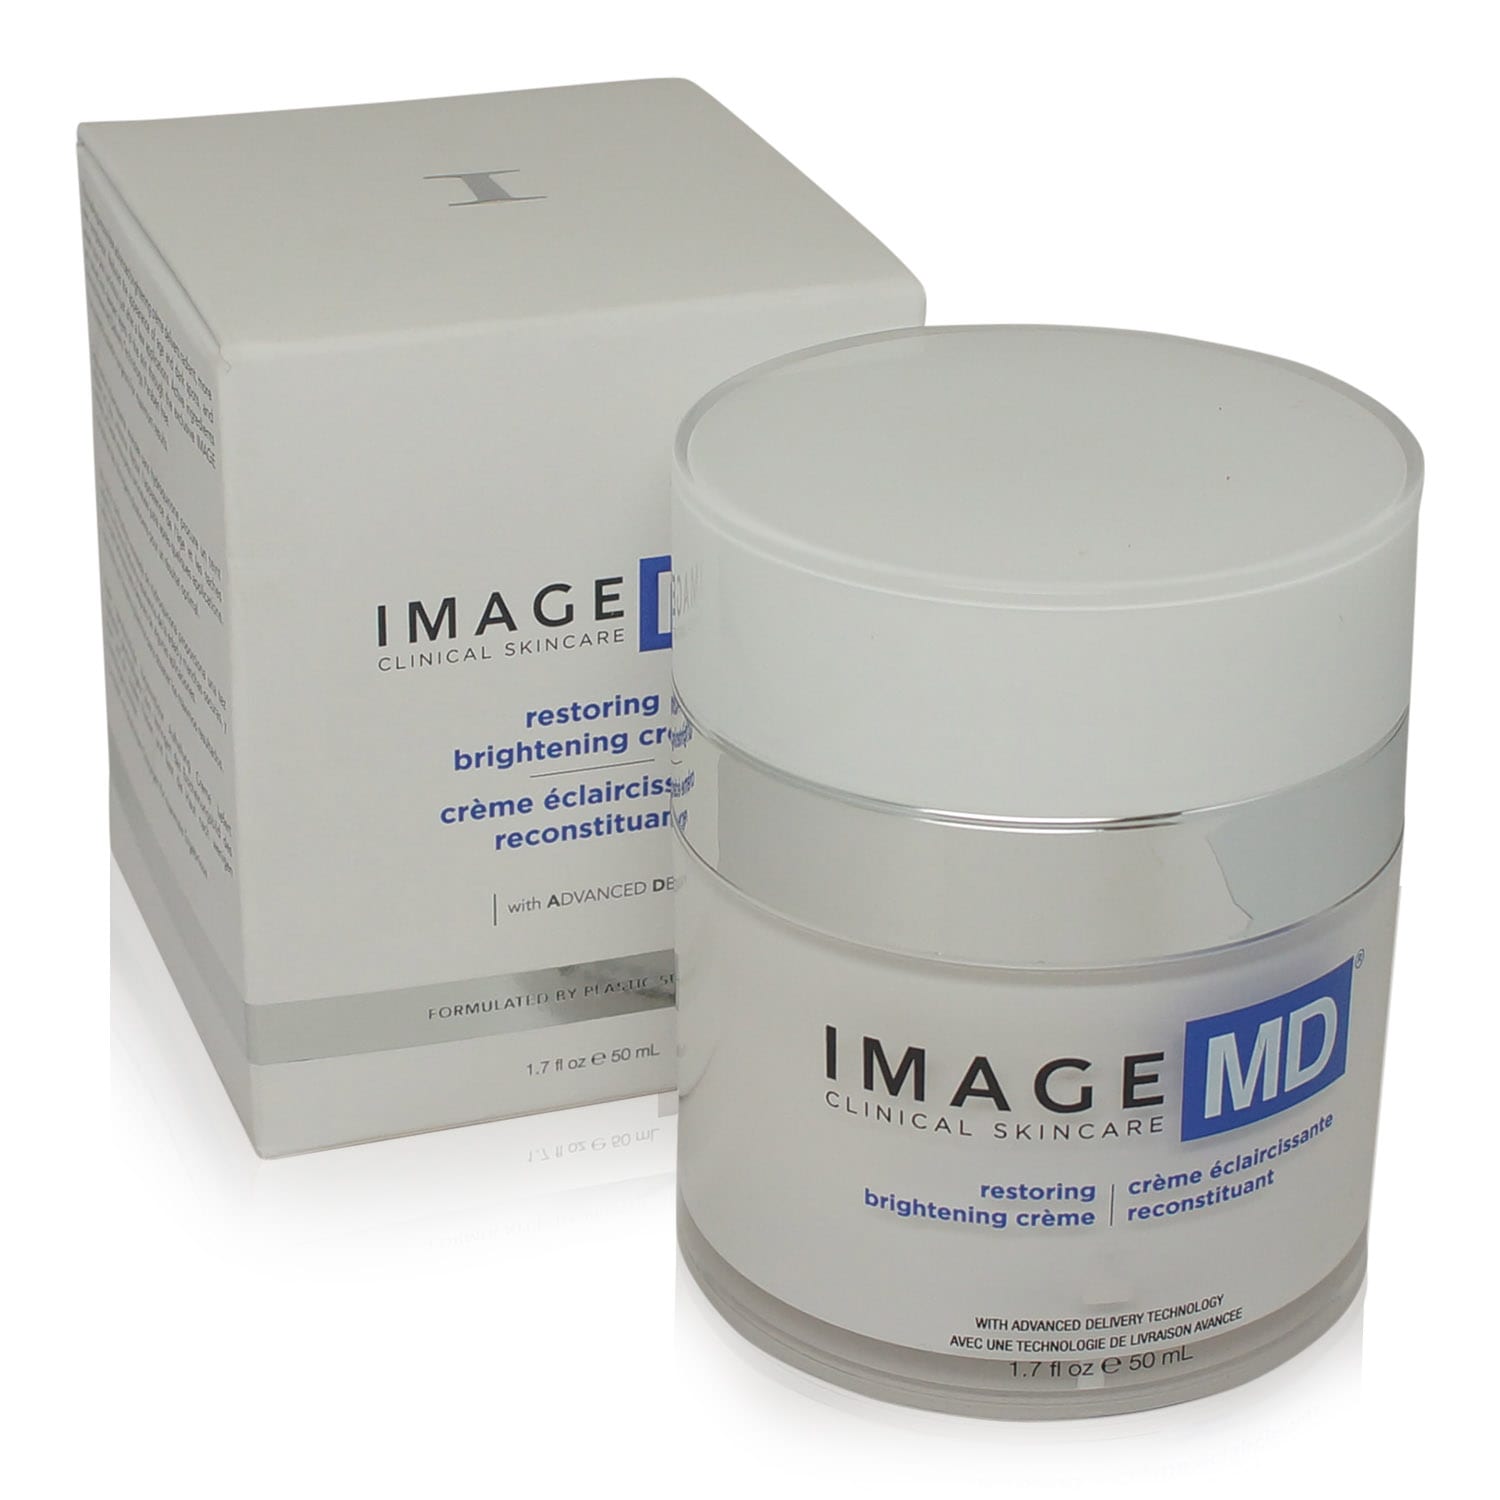 Image SKincare moisturizing cream box and product front view